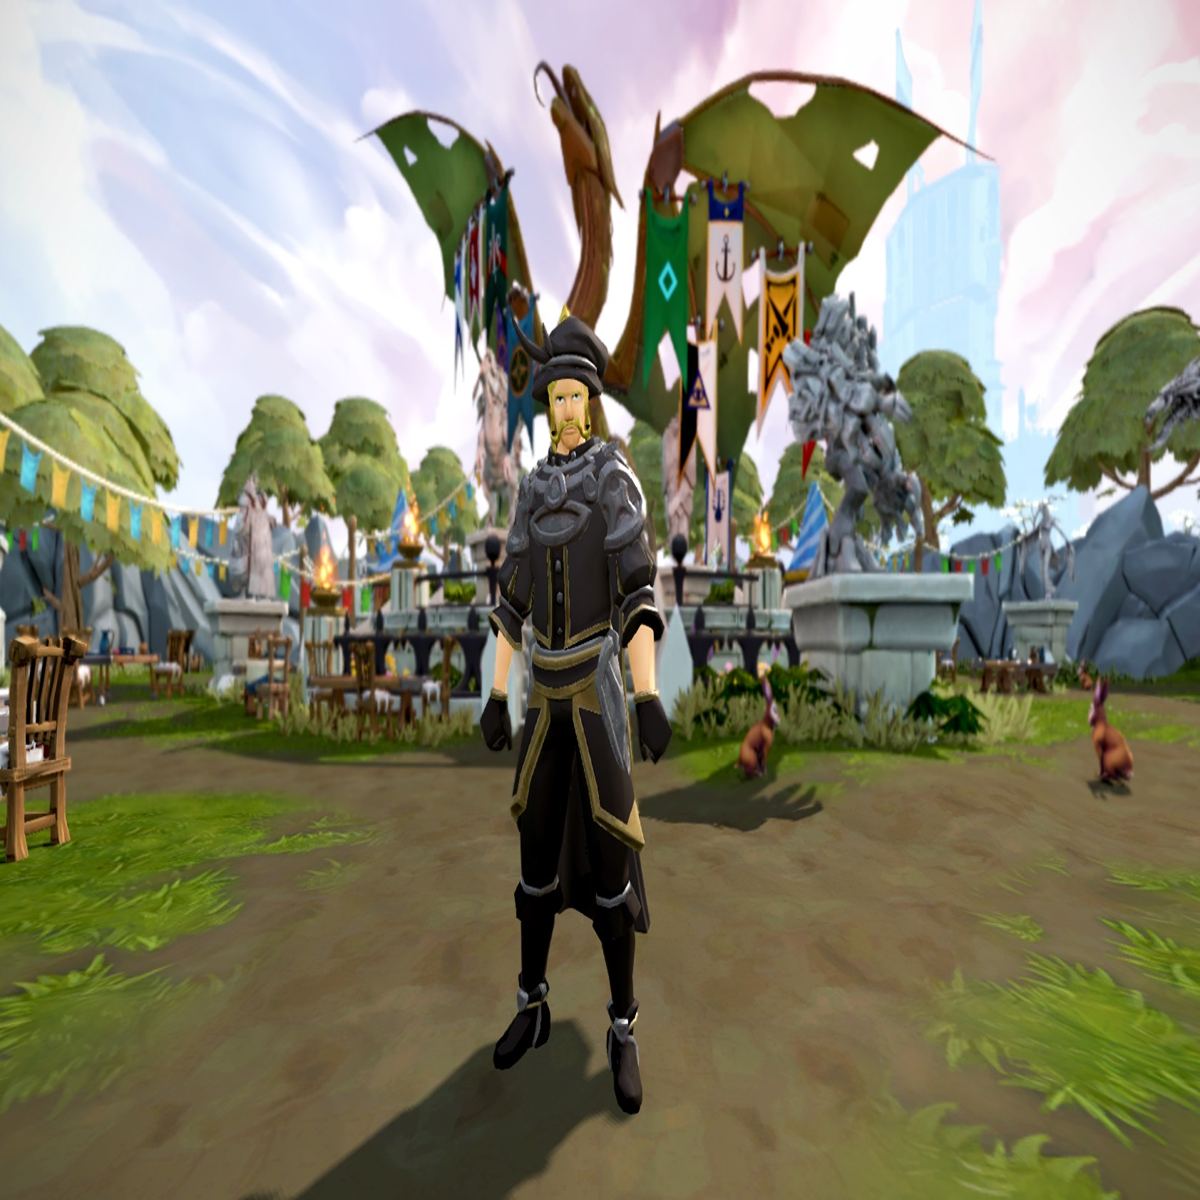 RuneScape 3 - gameplay 1 - RuneScape 3 is a Browser Based, Free to